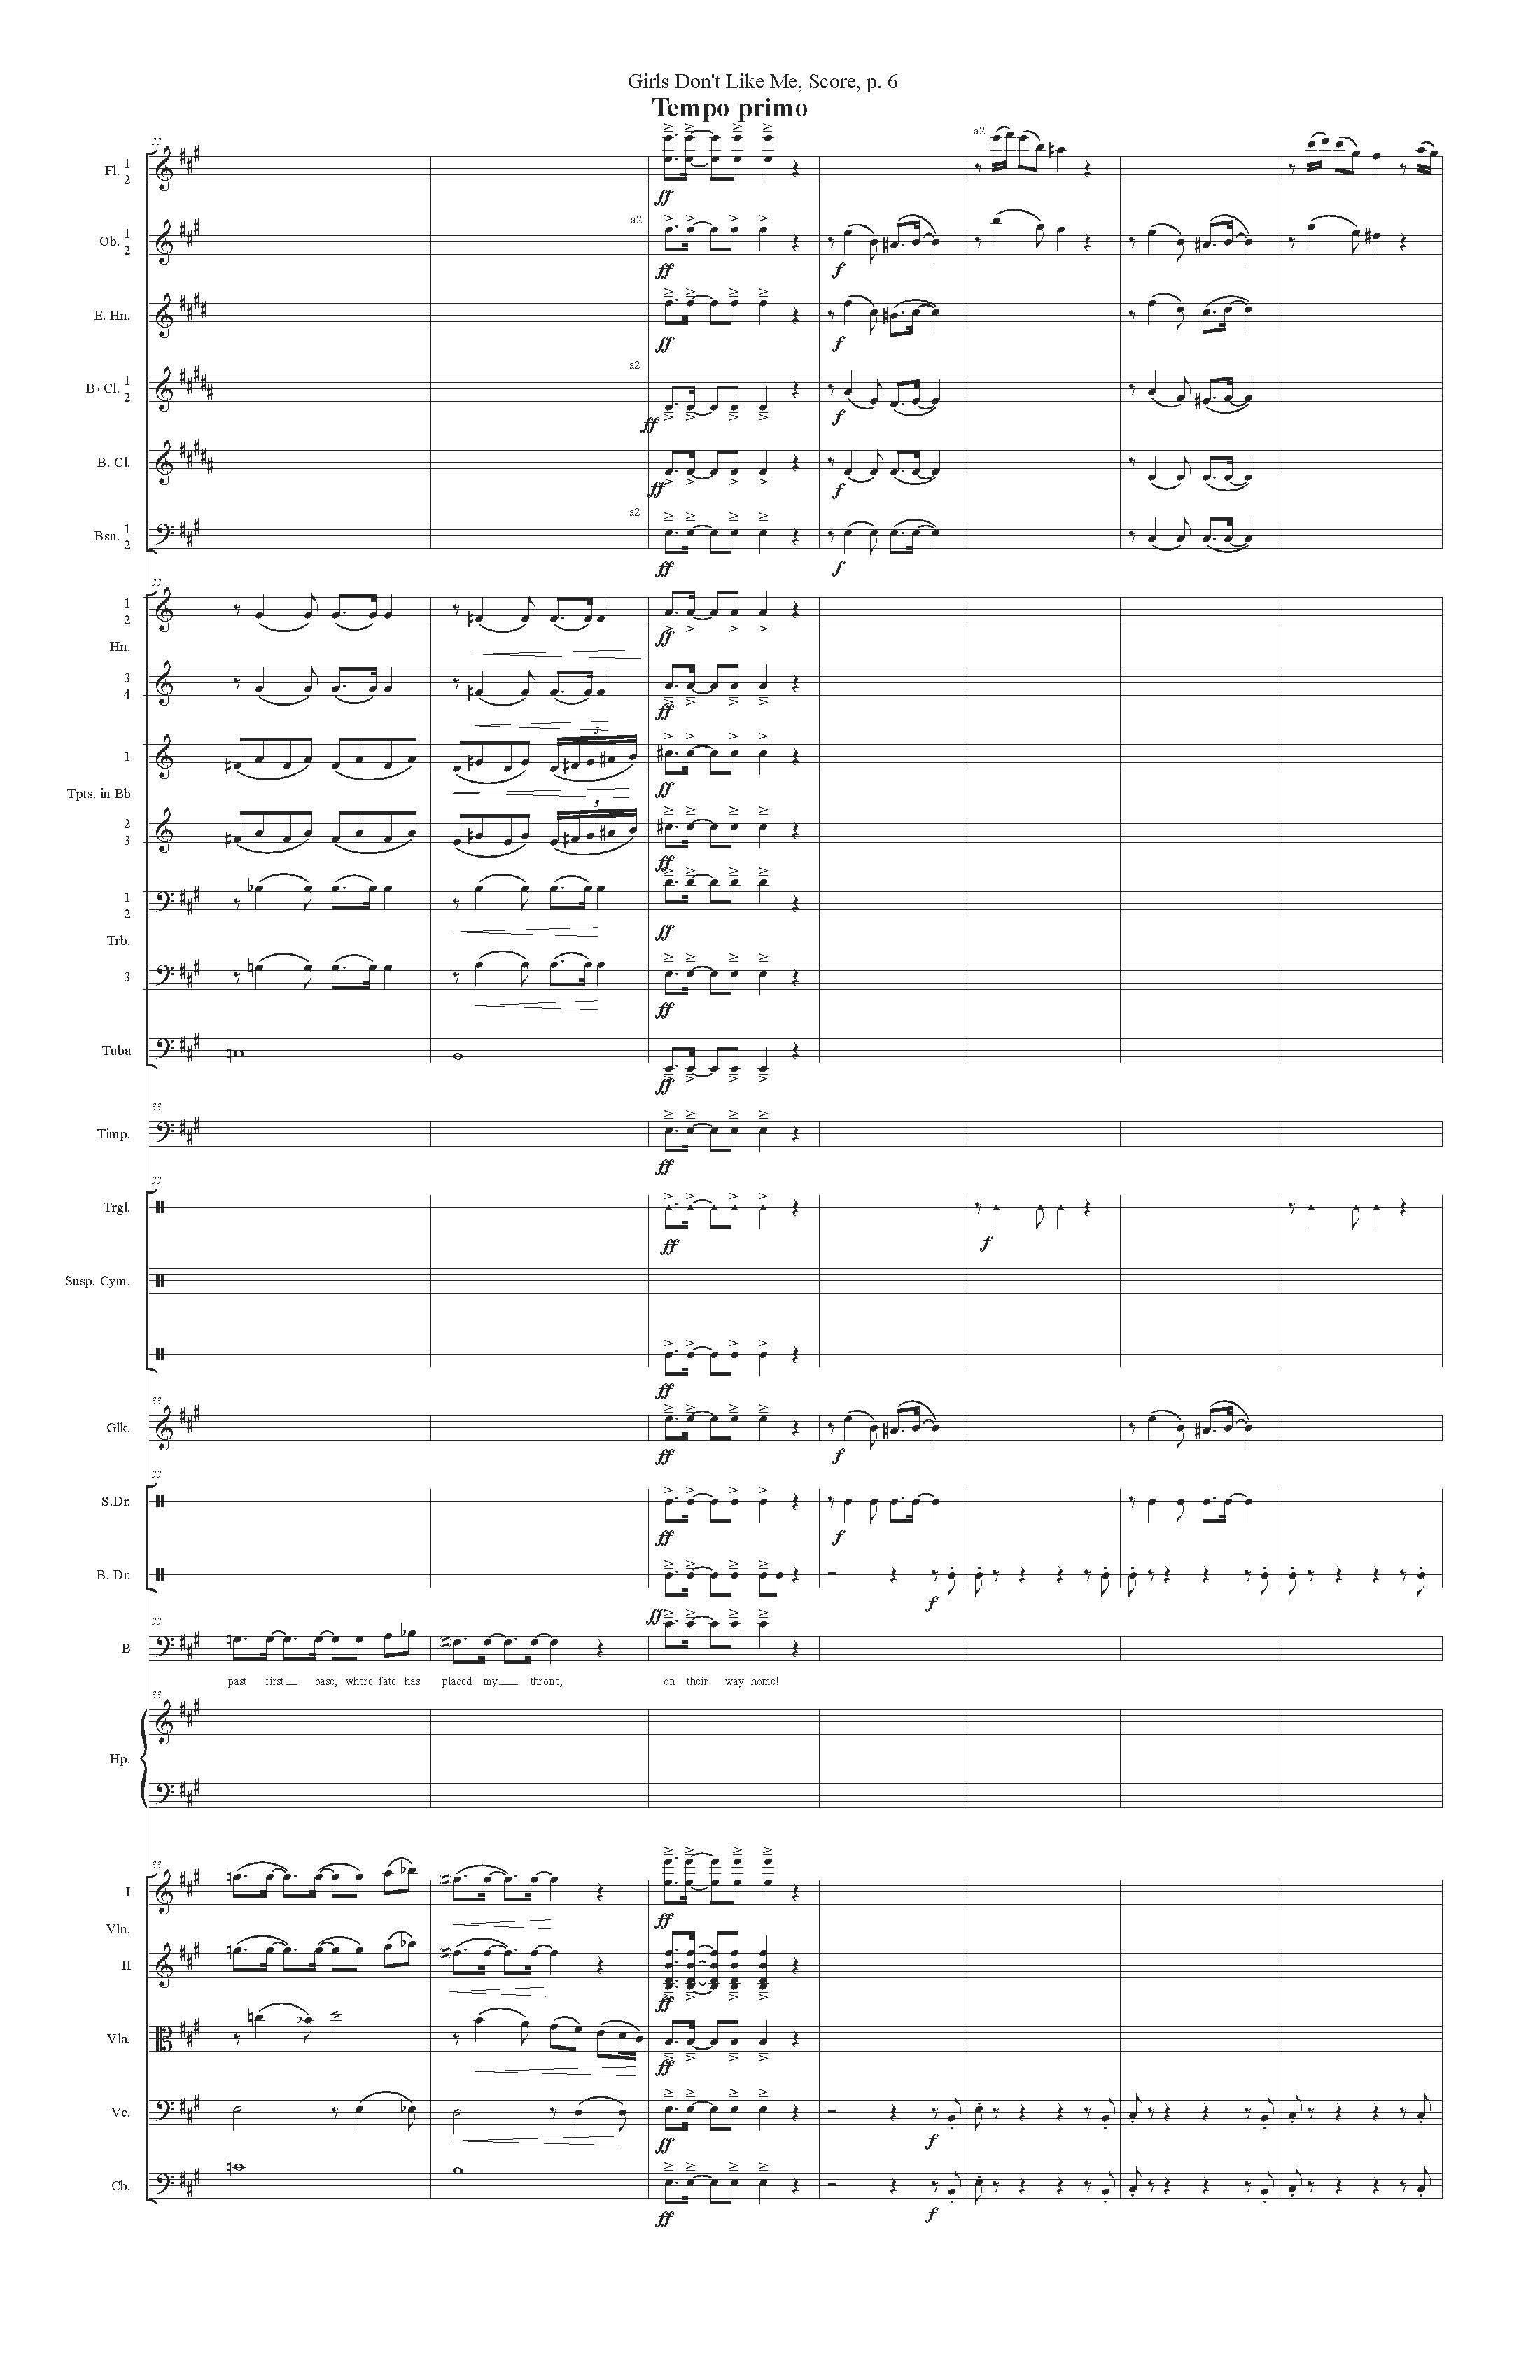 GIRLS DON'T LIKE ME ORCH - Score_Page_06.jpg